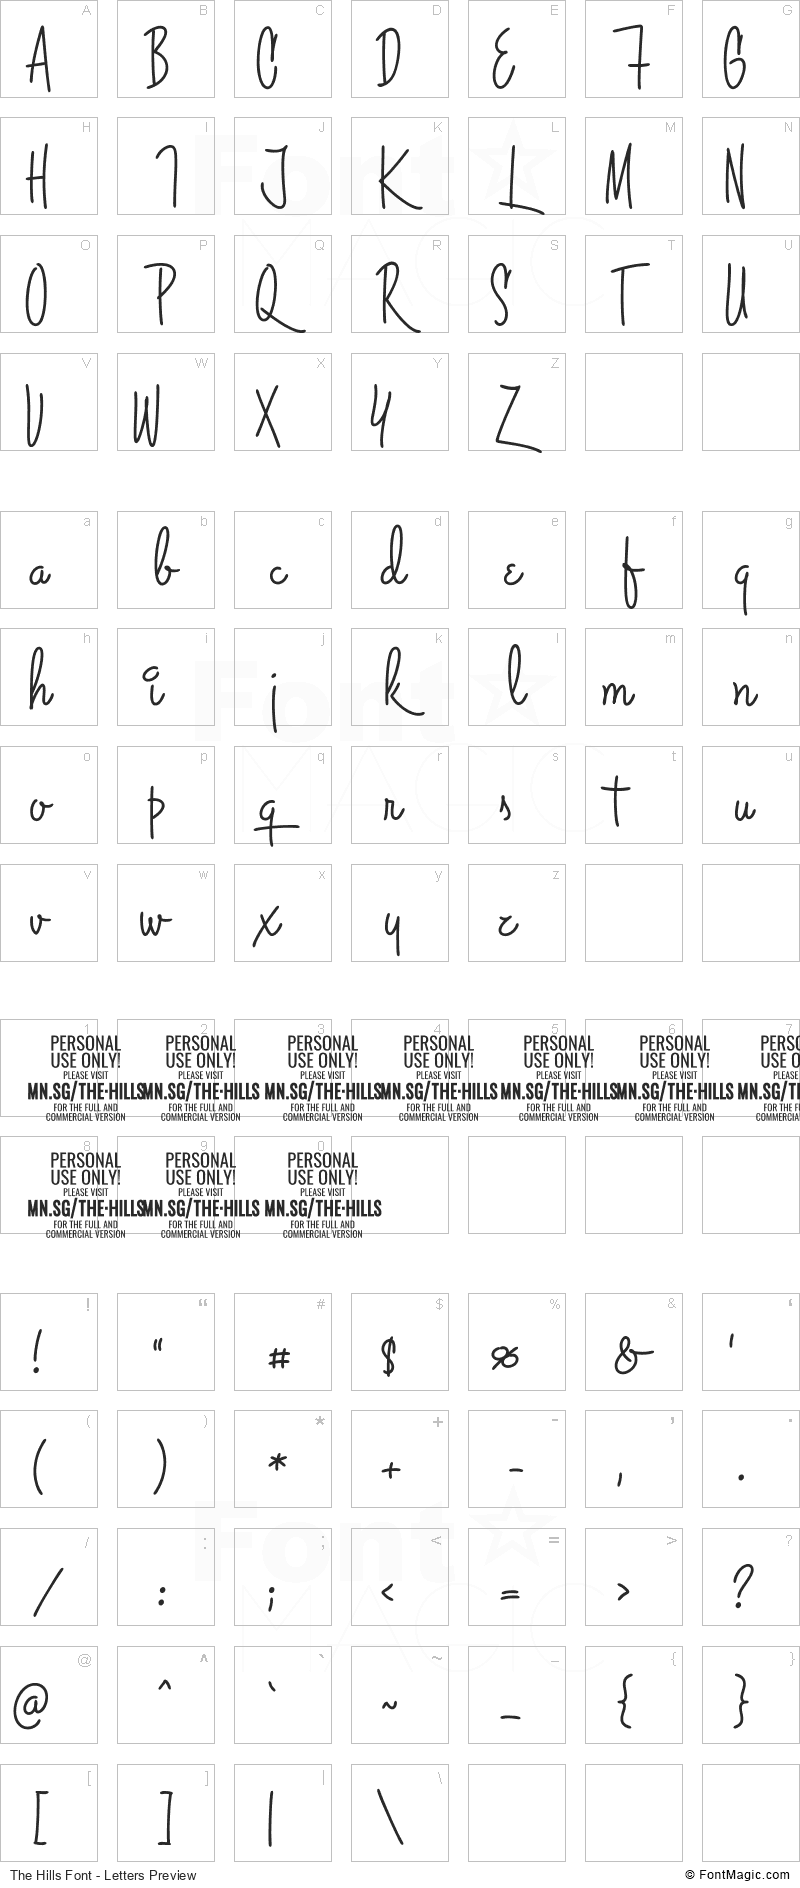 The Hills Font - All Latters Preview Chart